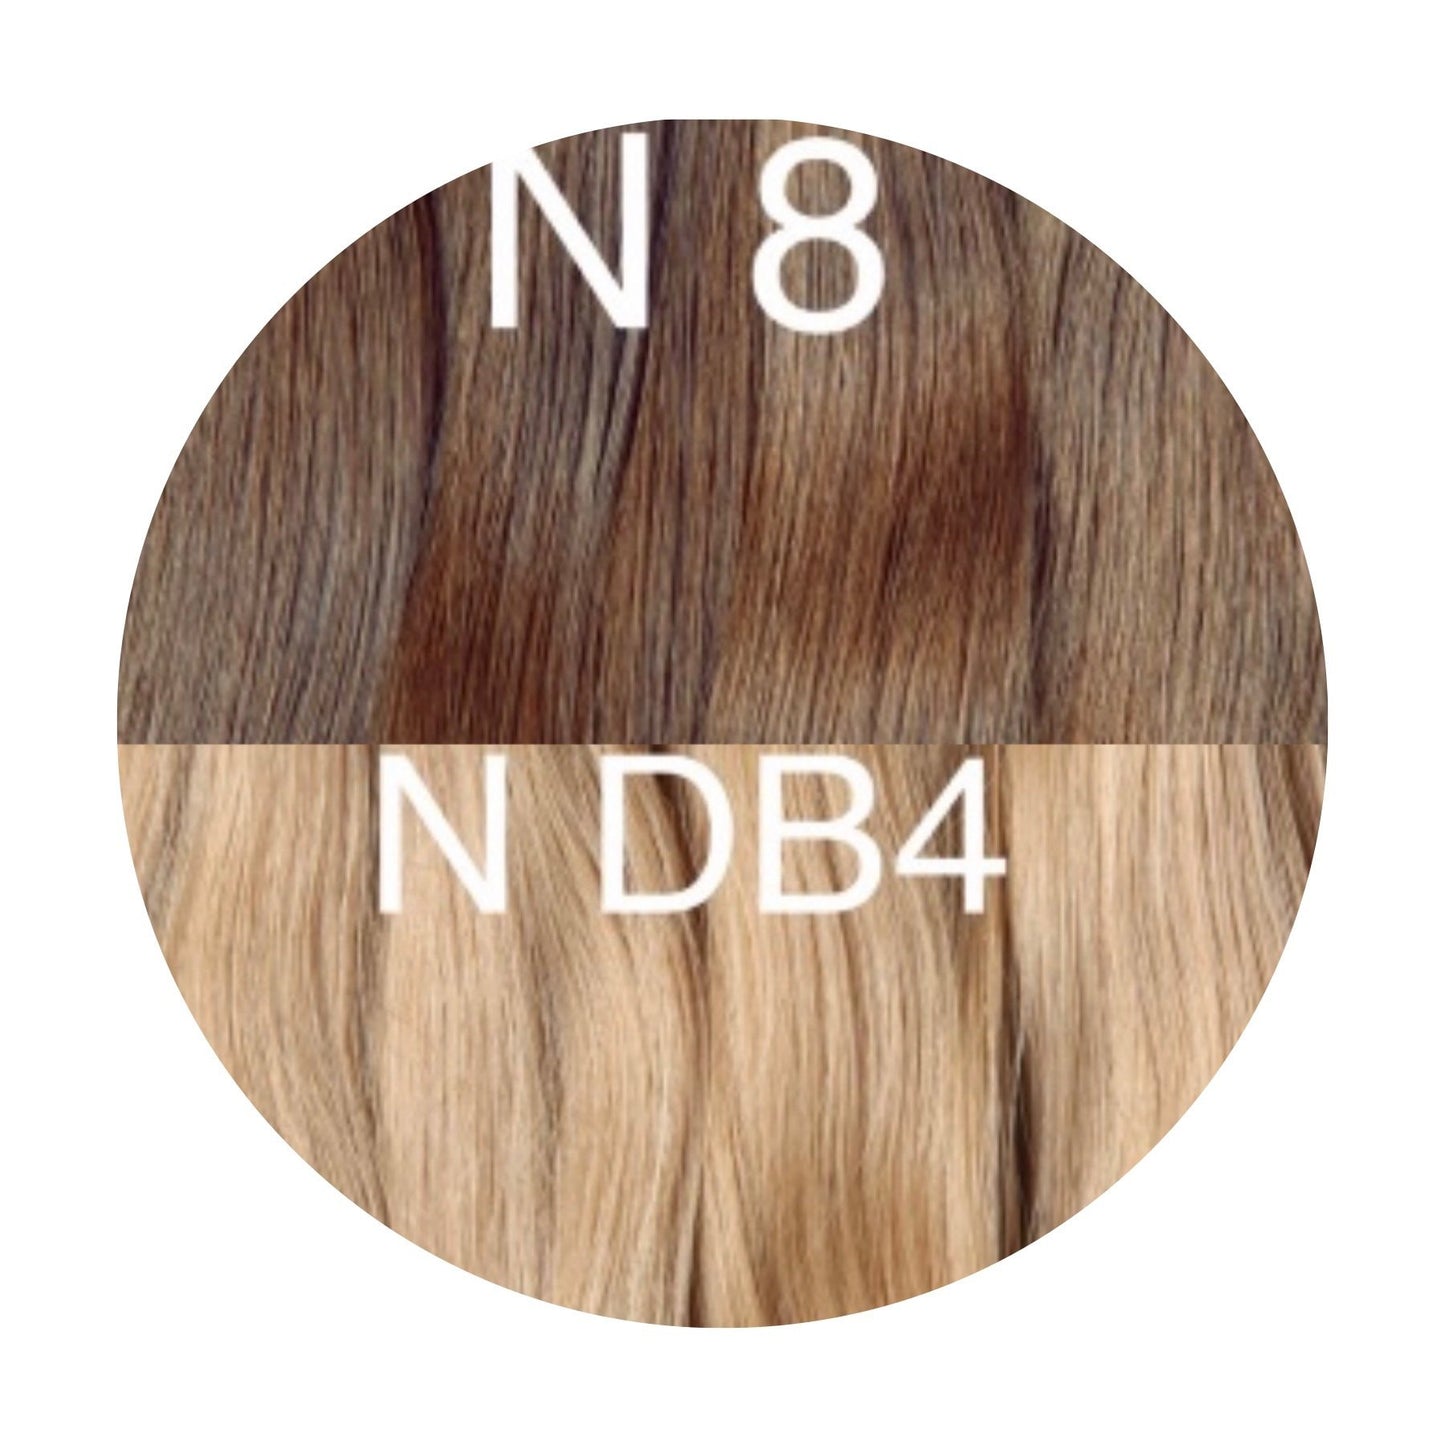 Tapes ombre Color 8 and DB4 GVA hair - GVA hair